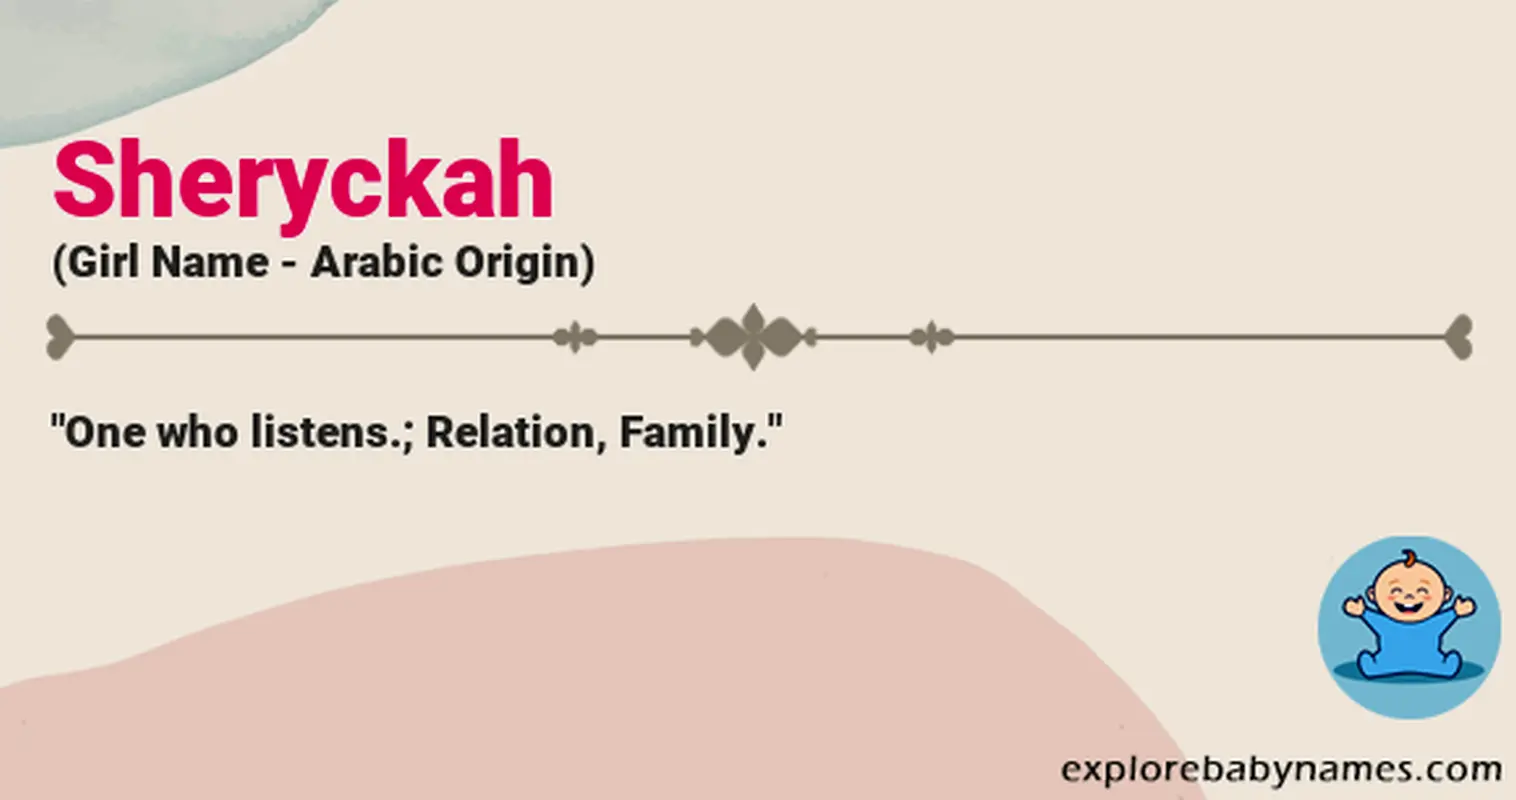 Meaning of Sheryckah